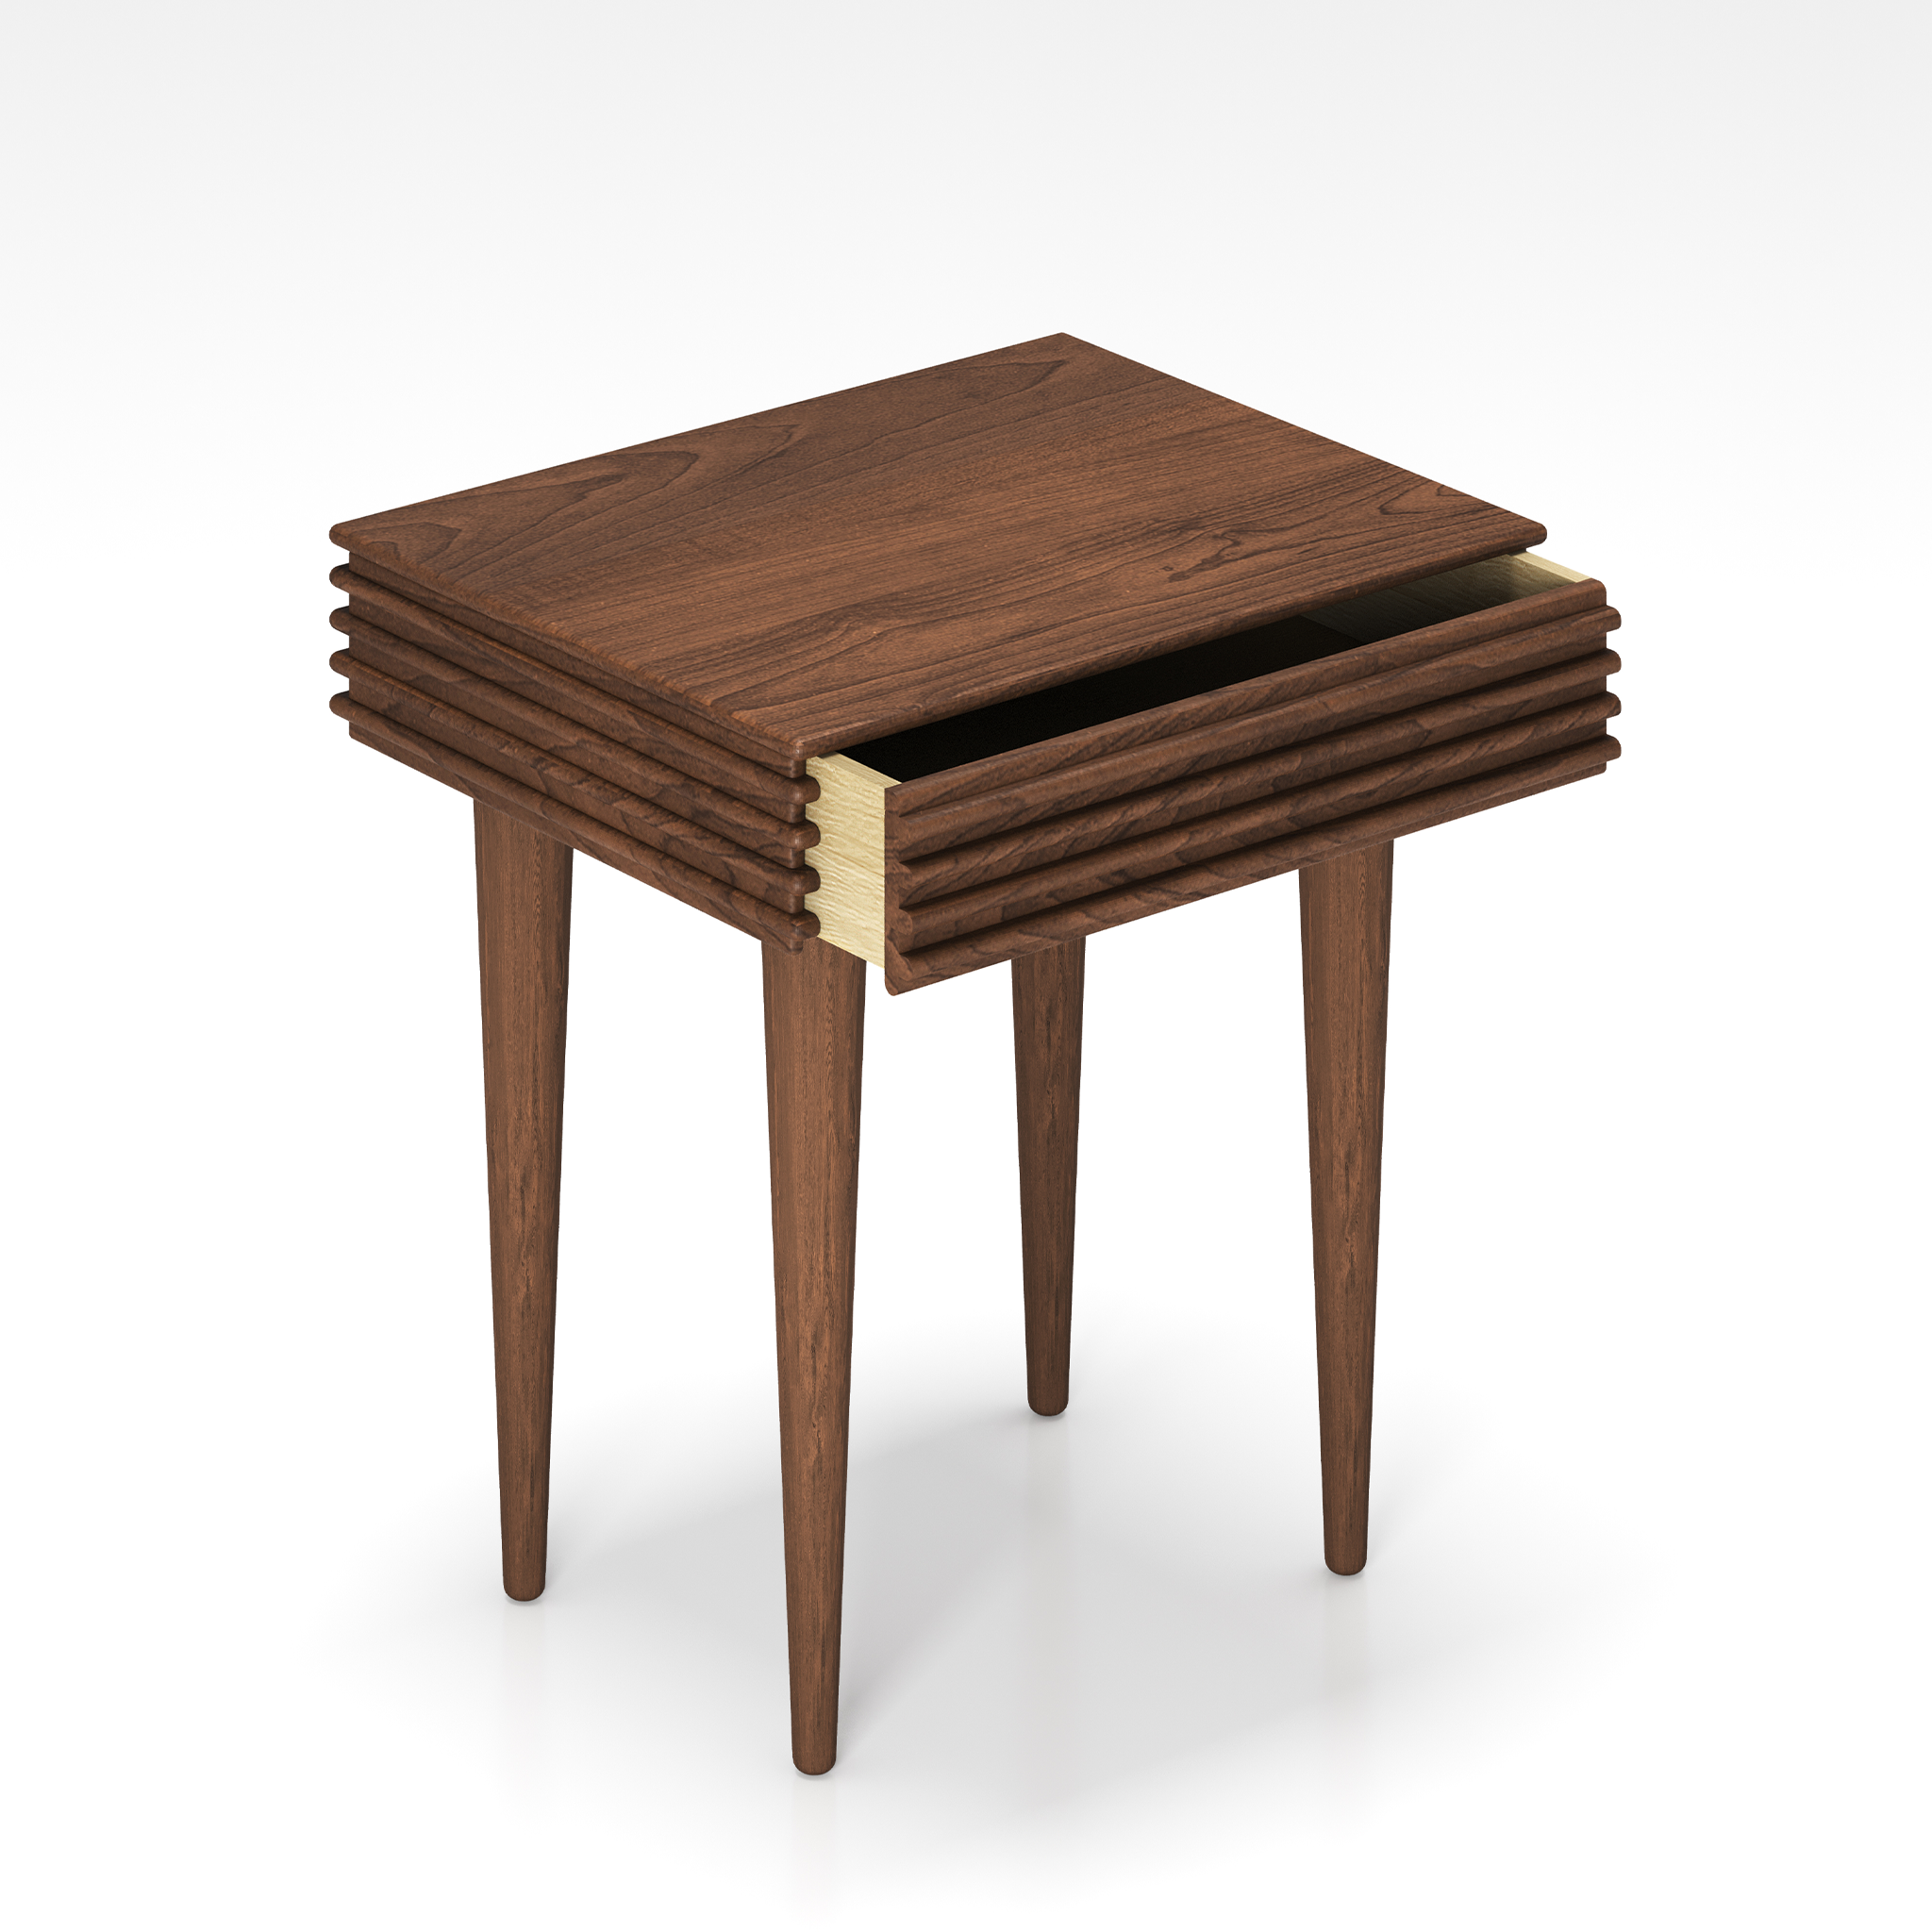 Groove Bedside Table by Christian Troels for DK3